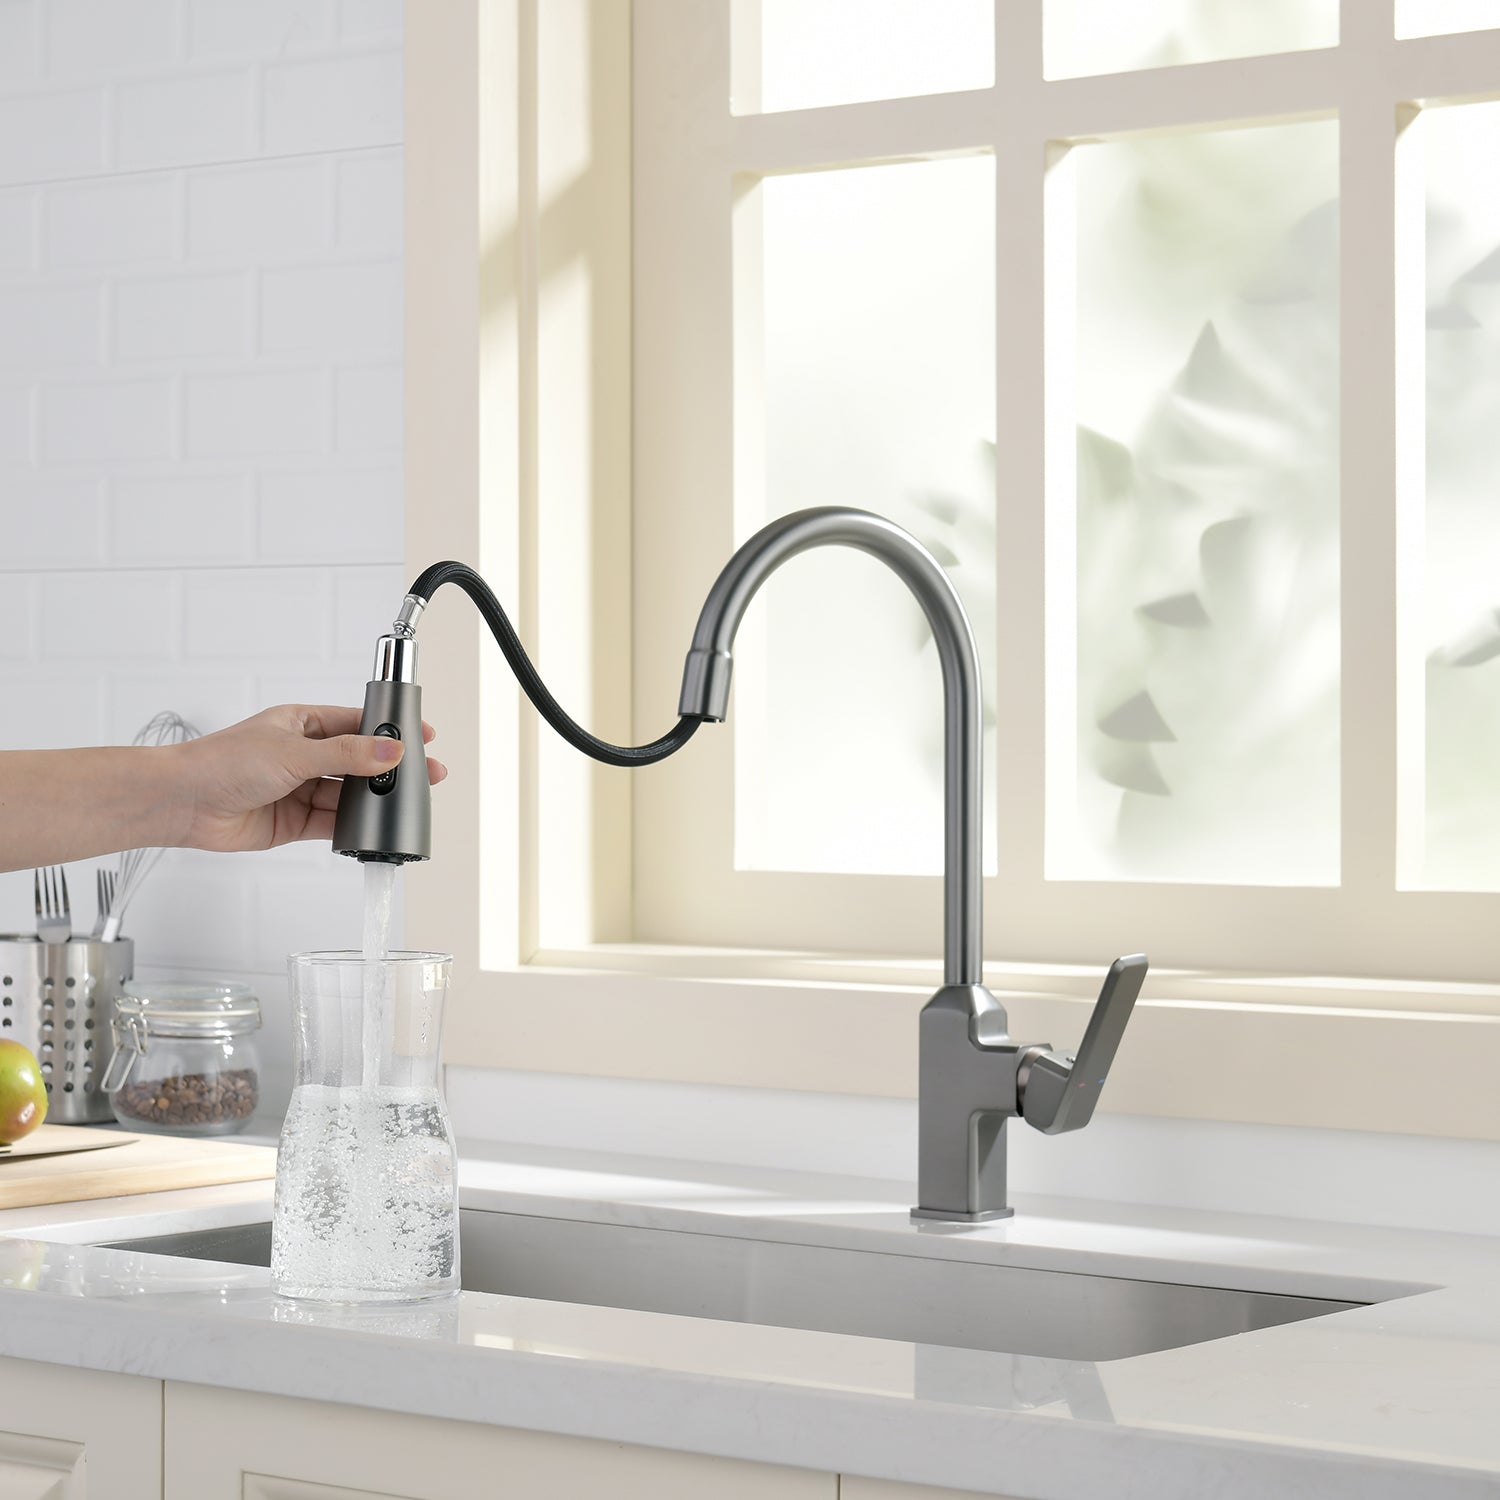 Lefton single handle Kitchen Pull-Down Faucet with 3 Water Outlet Modes-KF2201 -Kitchen Faucets